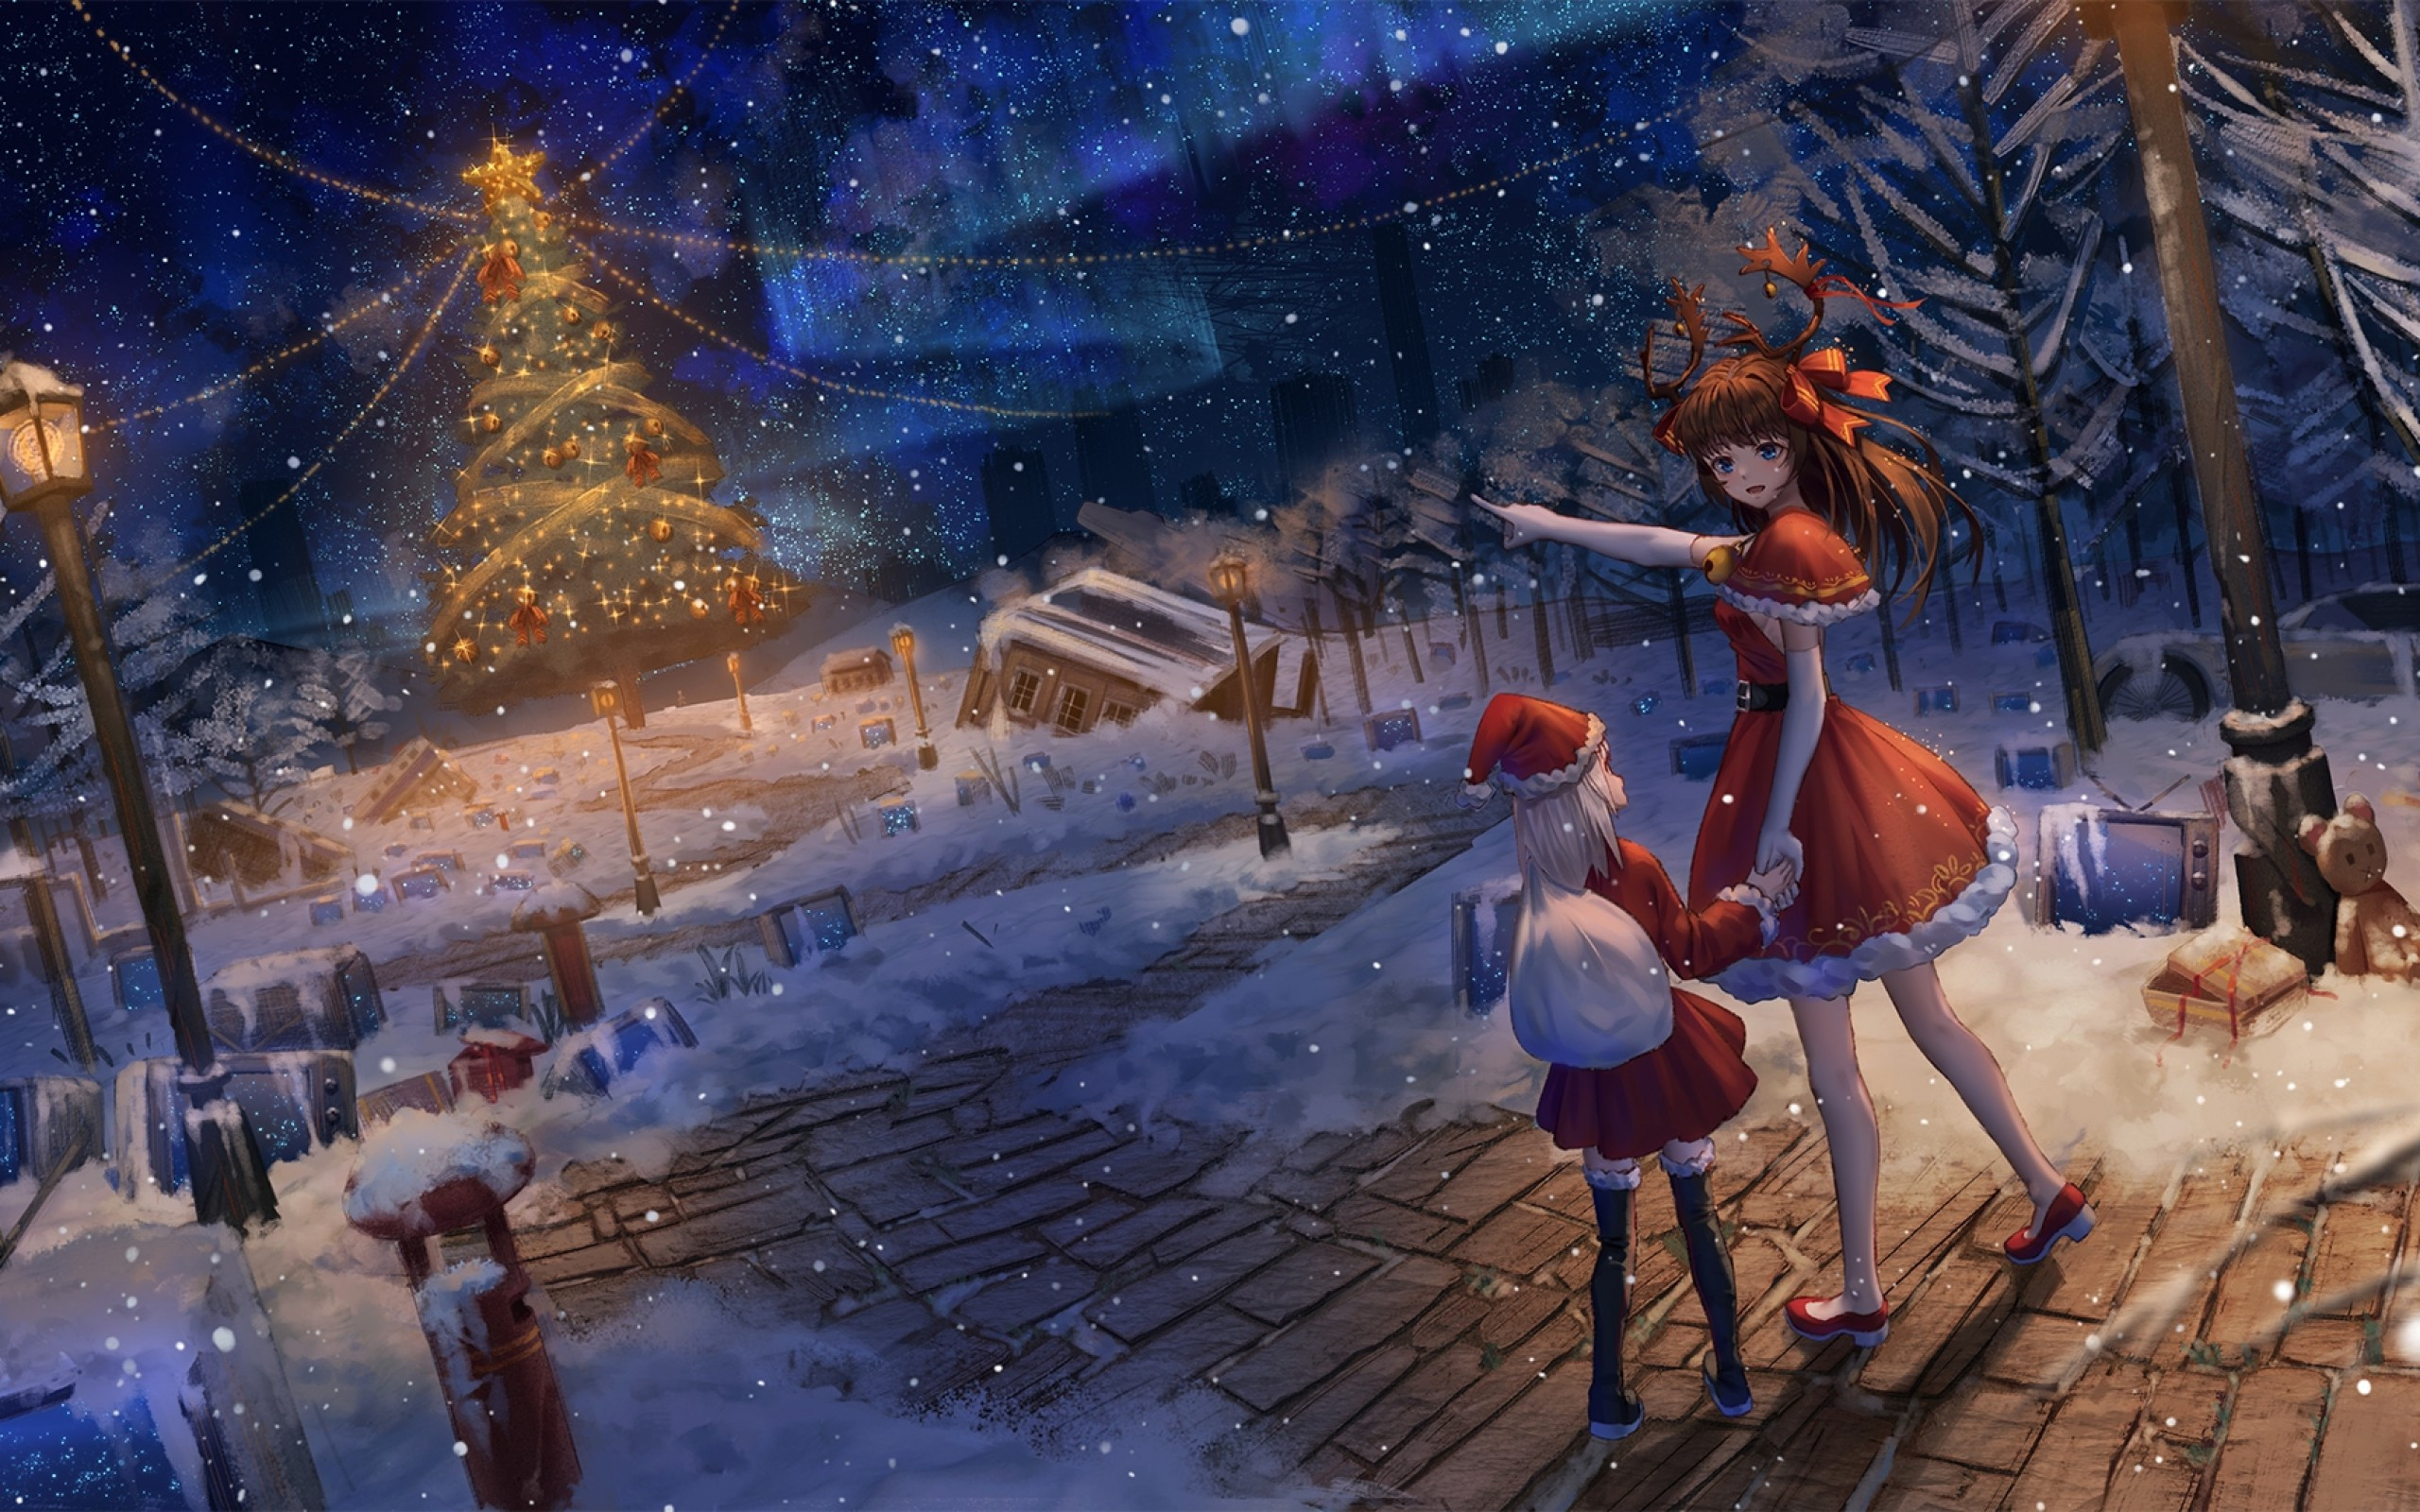 Download 2560x1600 Anime Christmas Santa Clothes, Tree, Snow, Scenic Wallpaper for MacBook Pro 13 inch